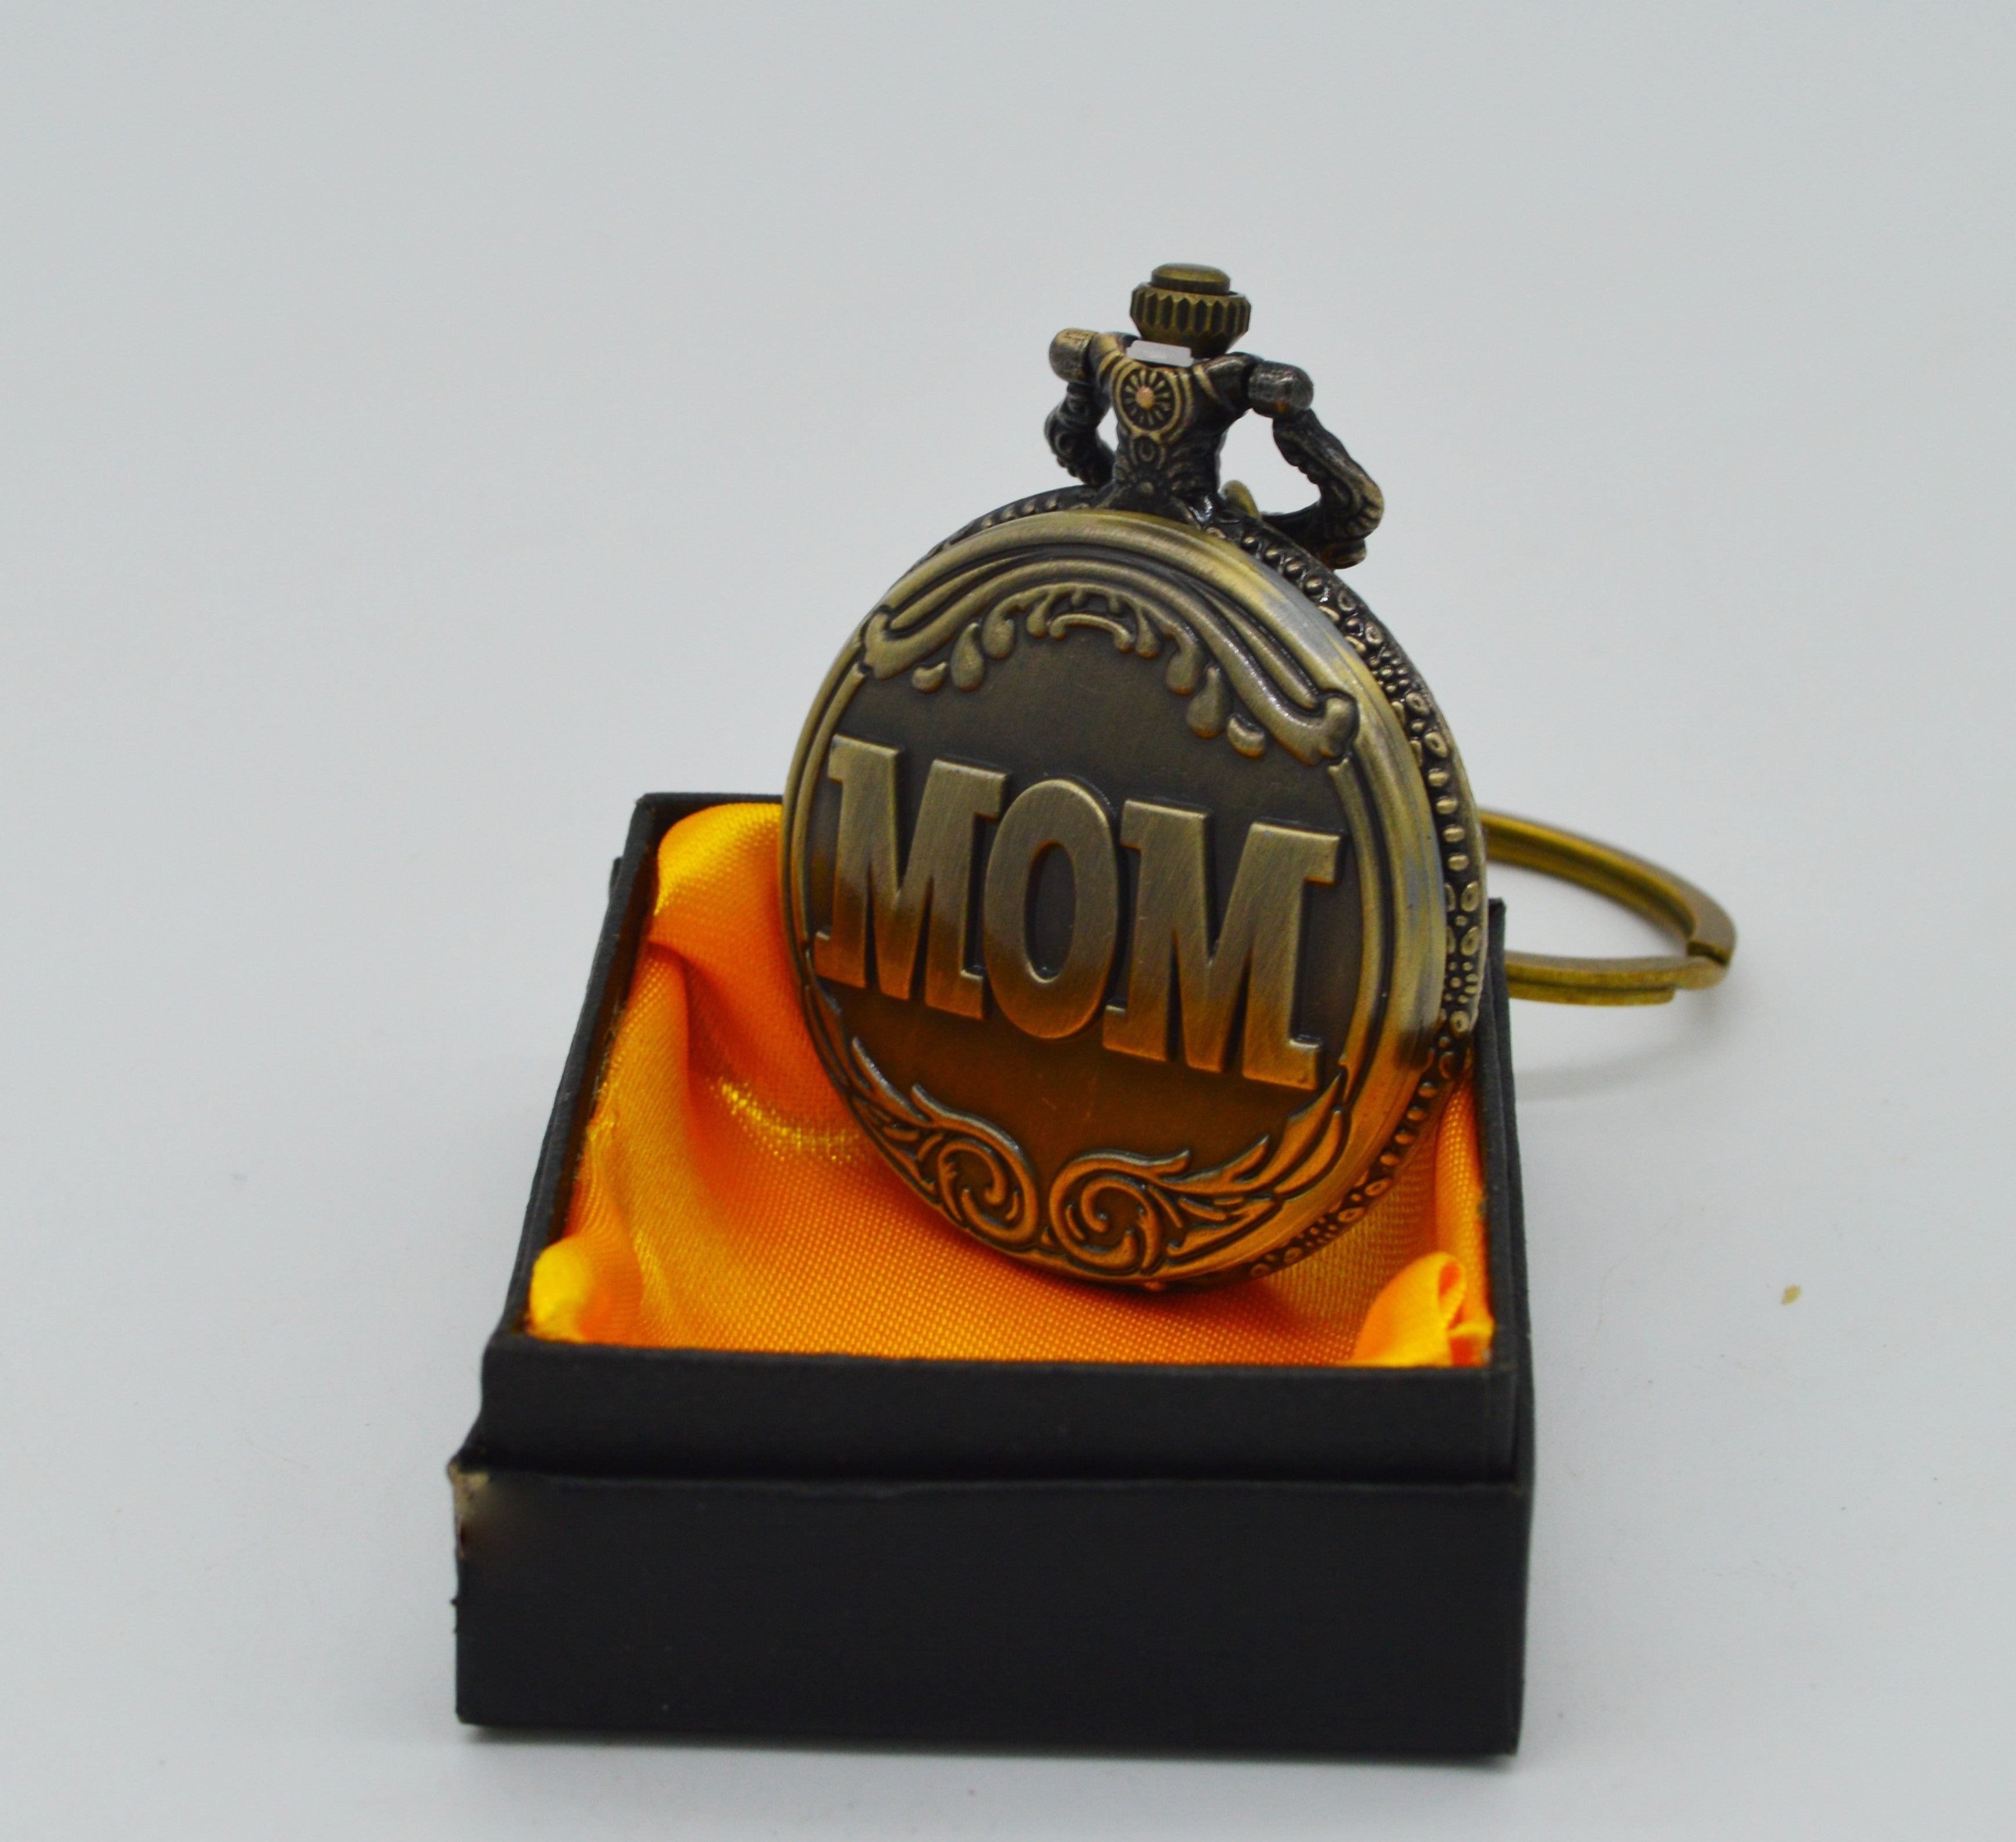 Antique Pocket Watch - Mom - The ShopCircuit